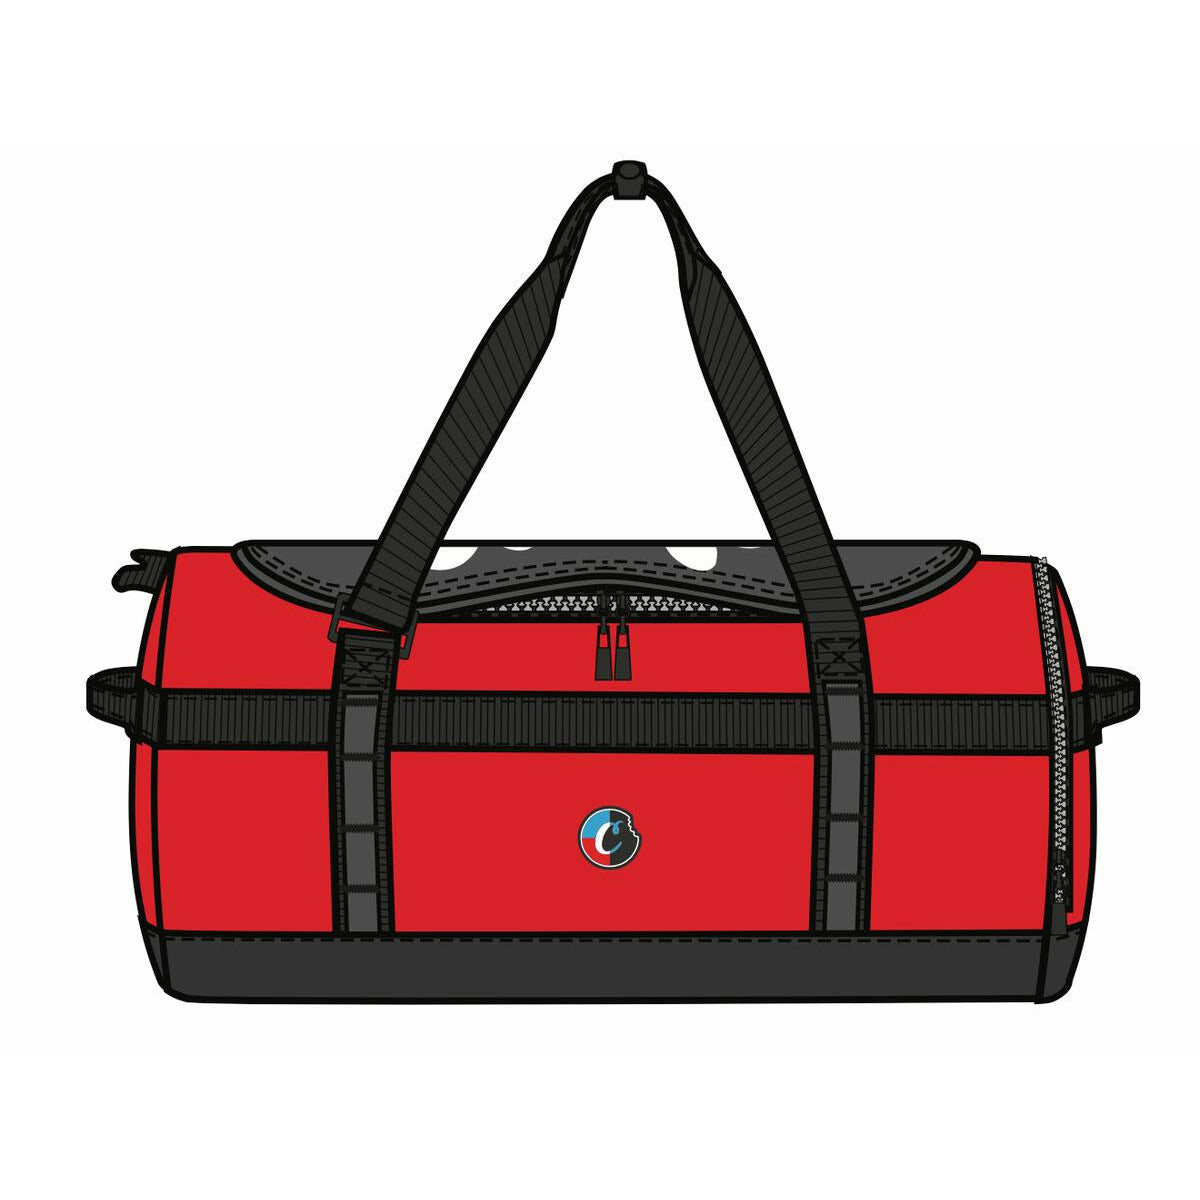 Cookies Parks Utility Smell Proof Nylon Duffel Red Bag